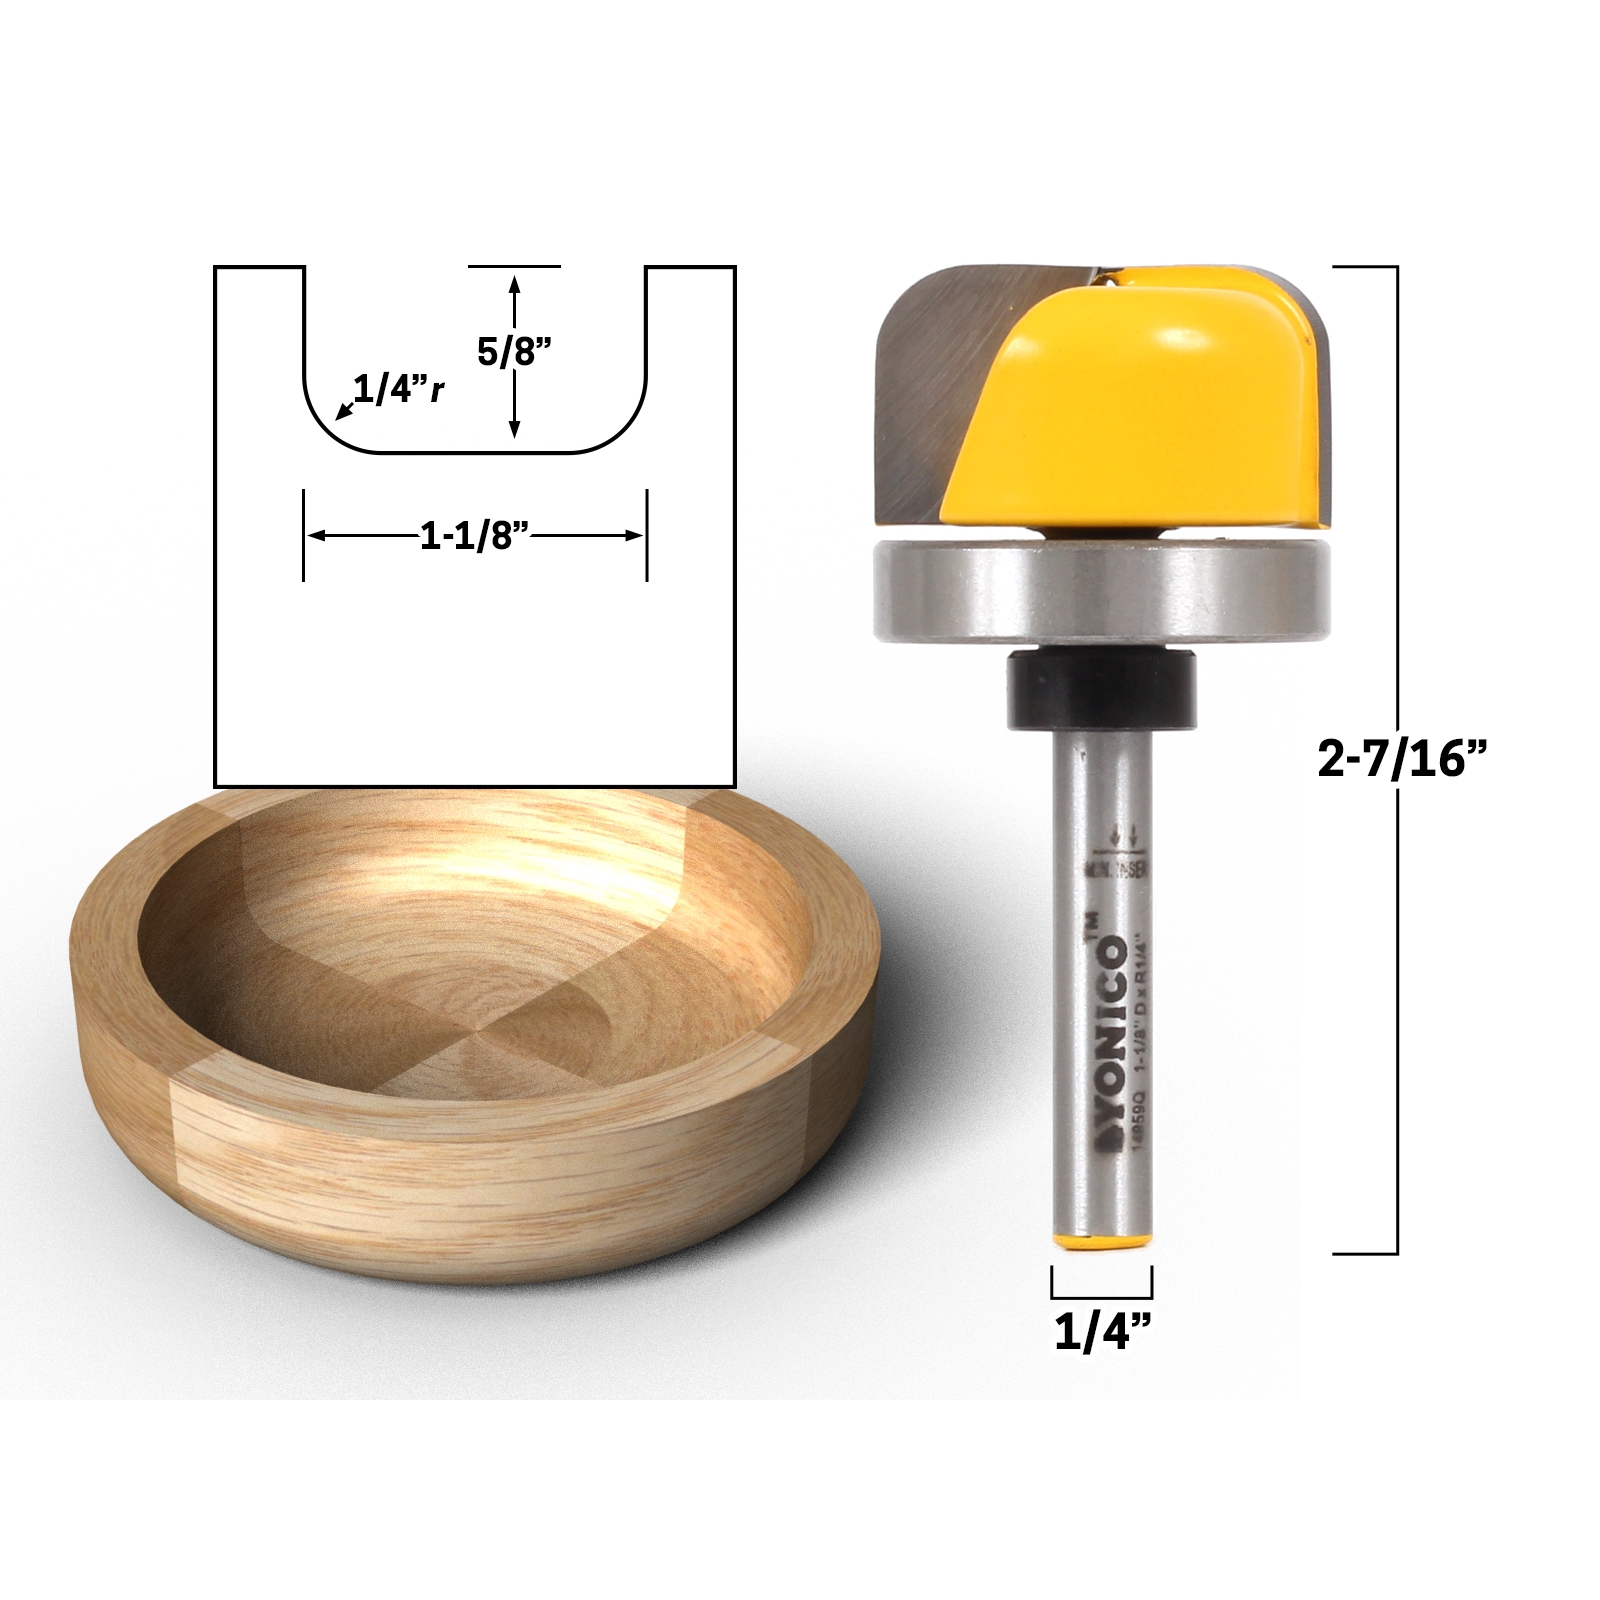 Yonico 14959q 1-1/8-Inch Diameter Bowl & Tray Template Router Bit 1/4-Inch Shank